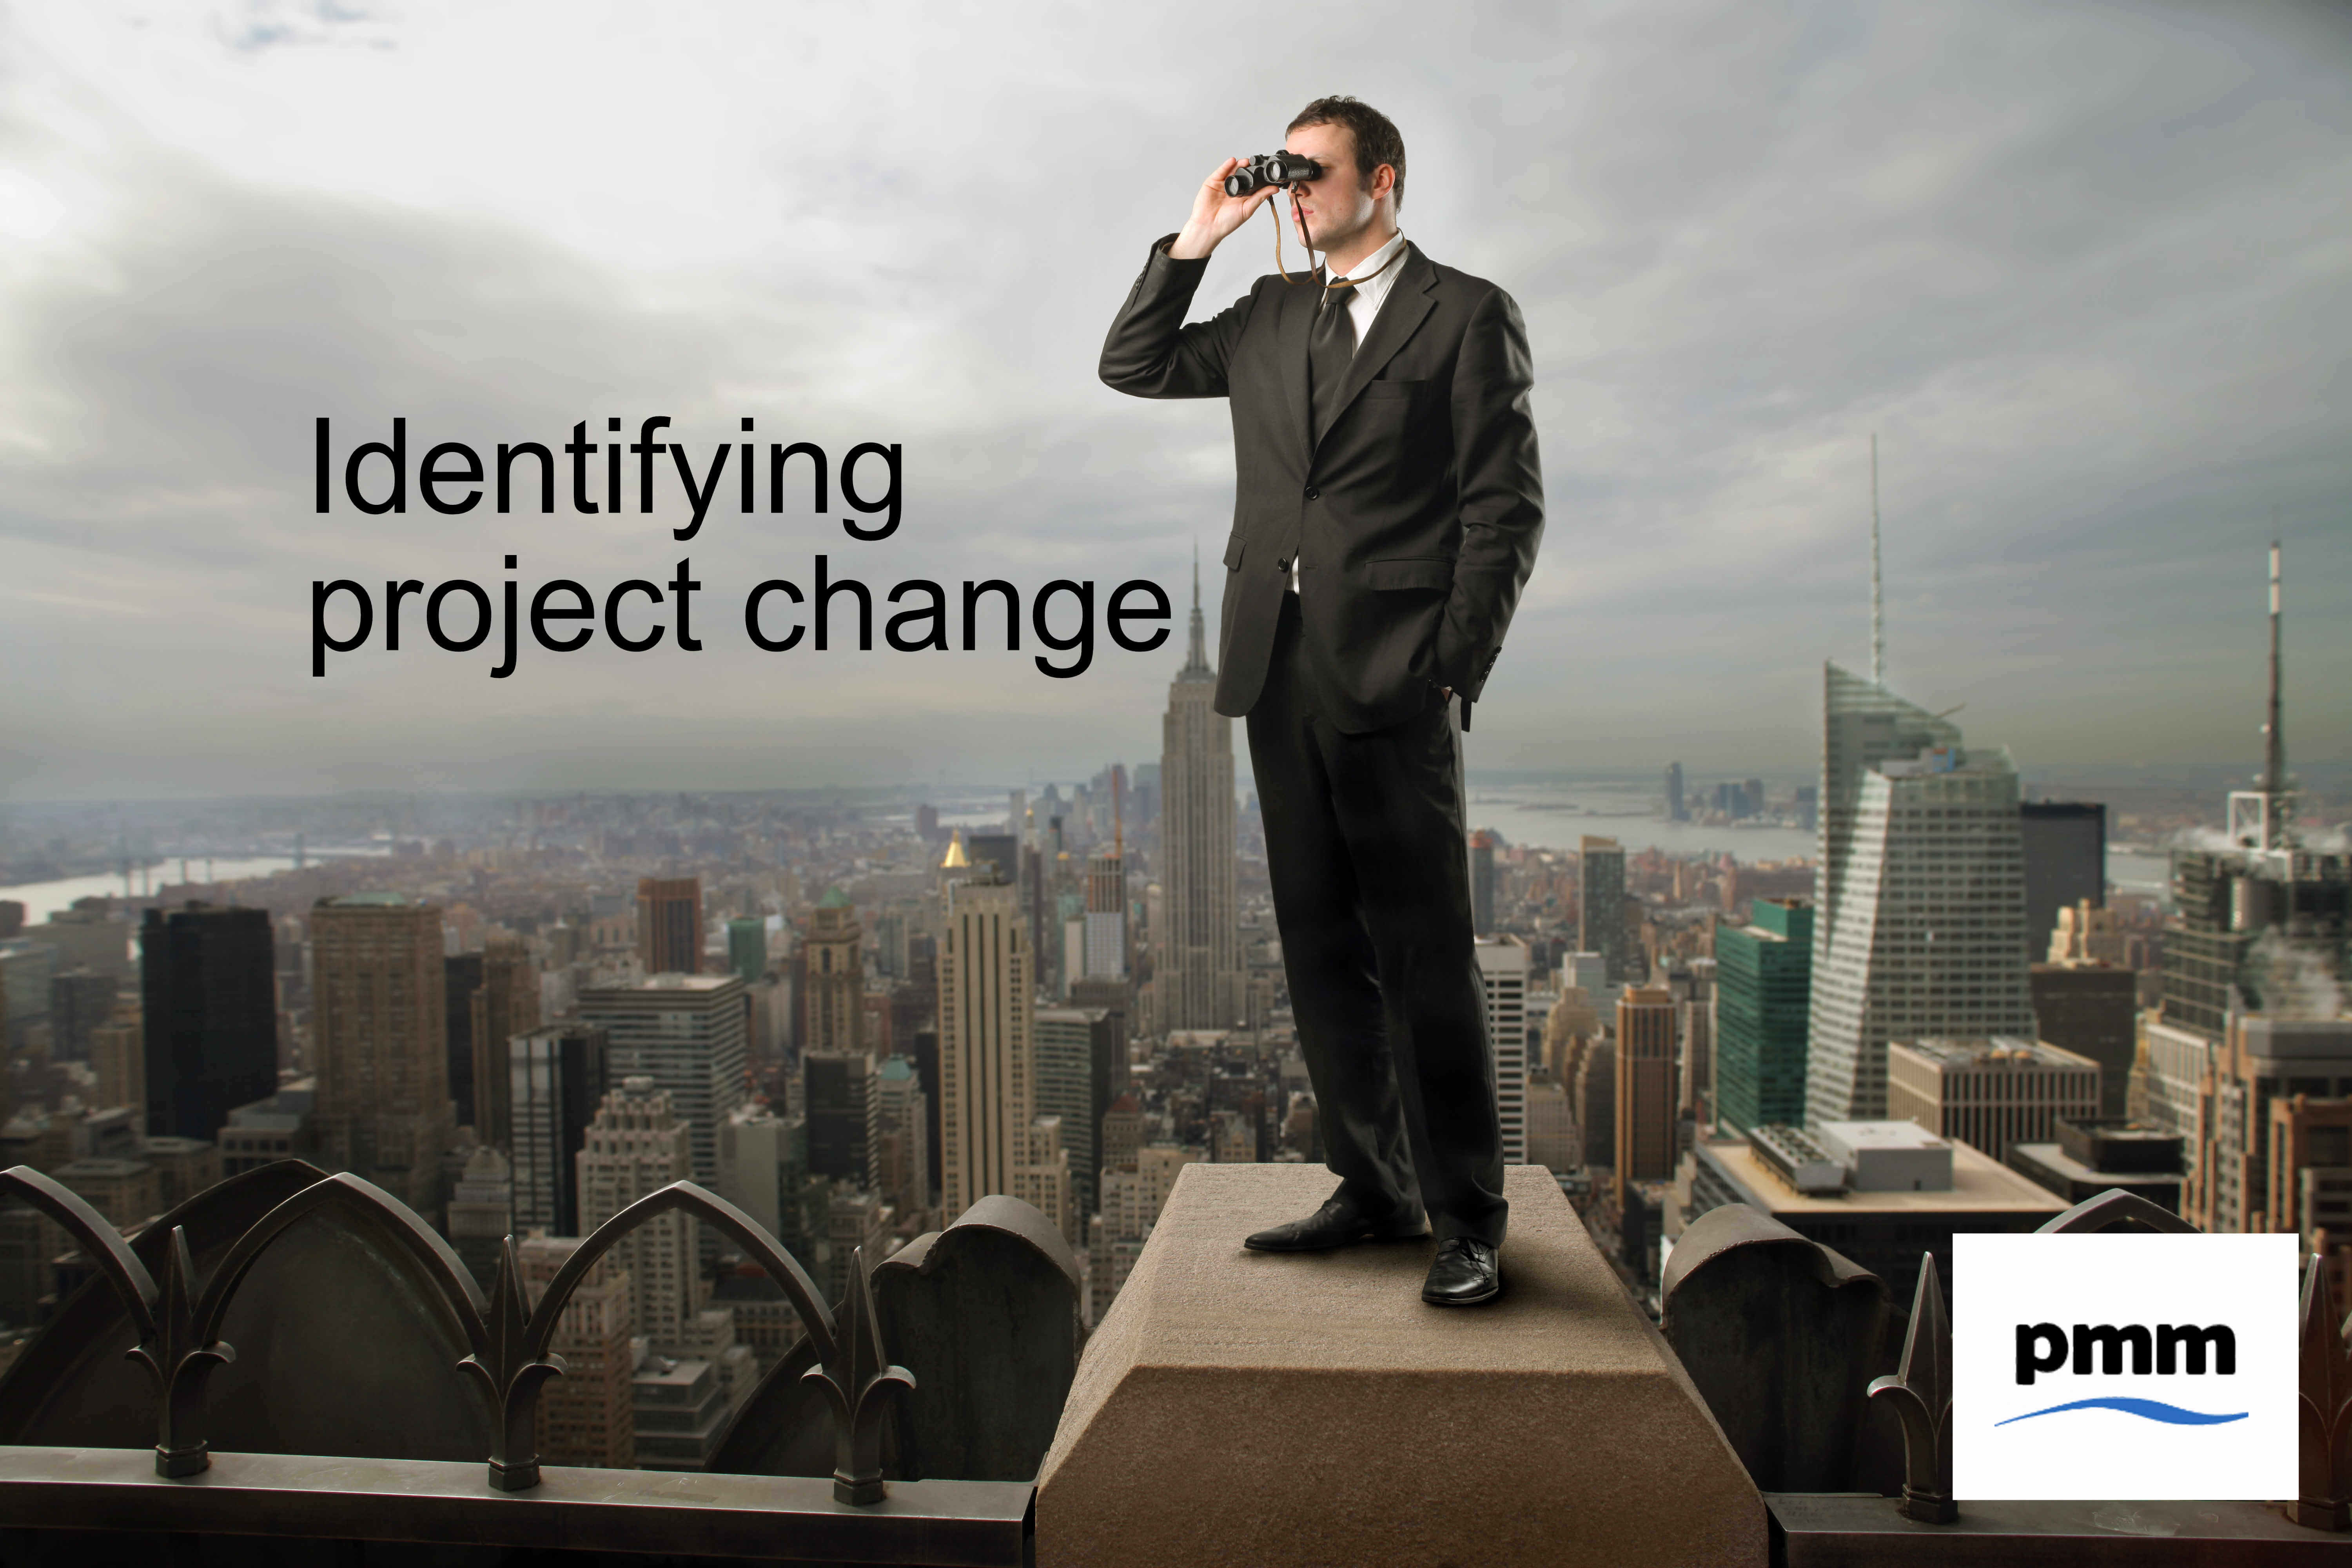 Identifying project change requests